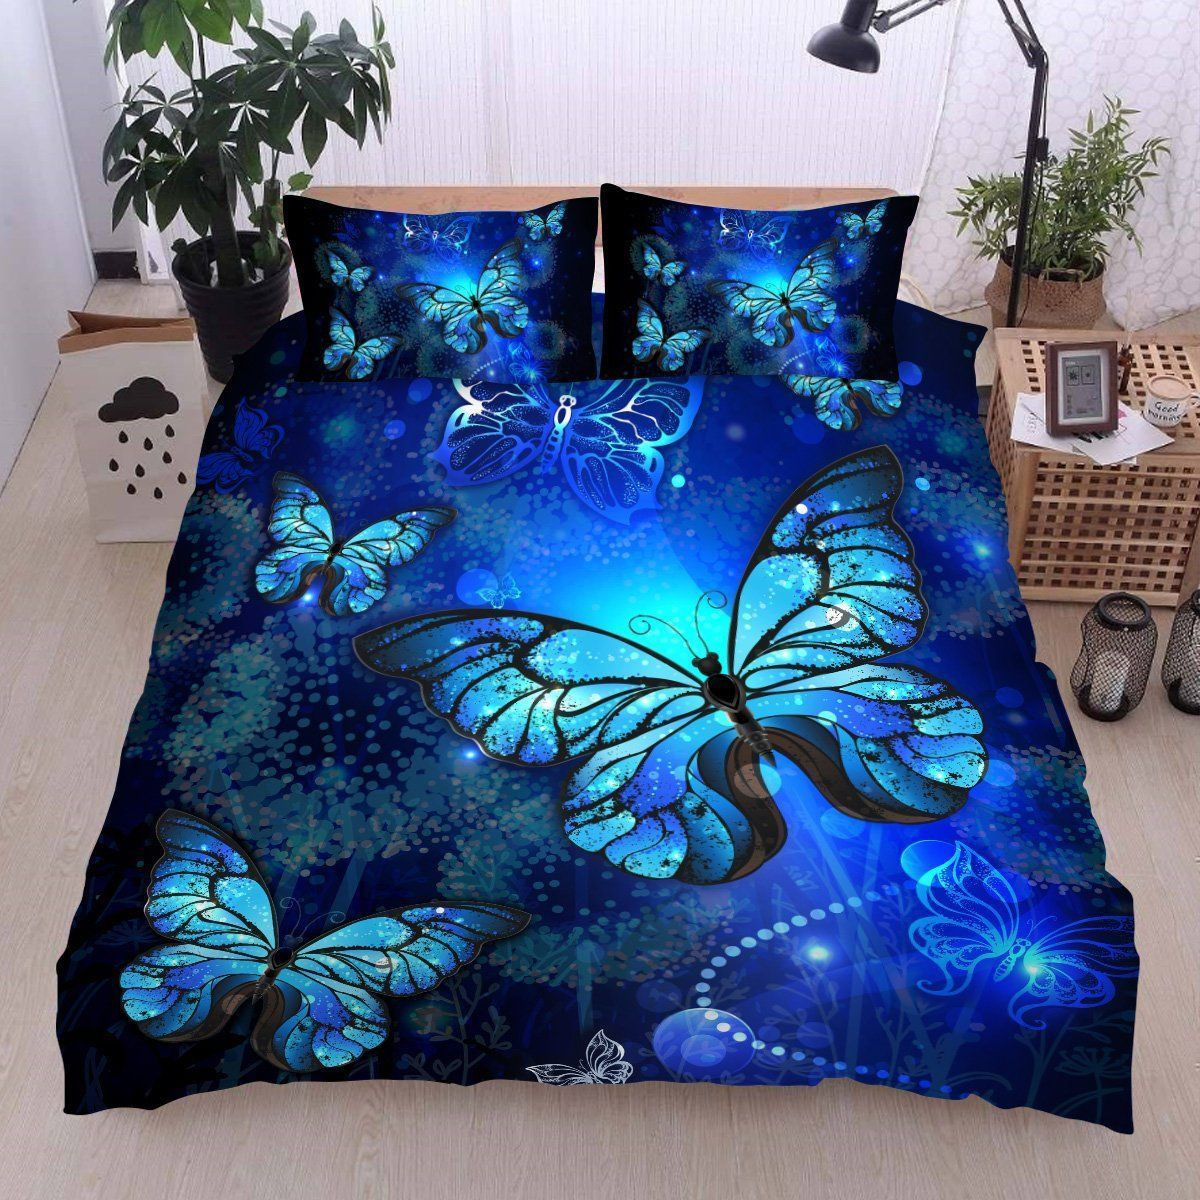 blue butterfly bed sheets duvet cover bedding set ideal presents for birthday christmas thanksgiving 4xzgx